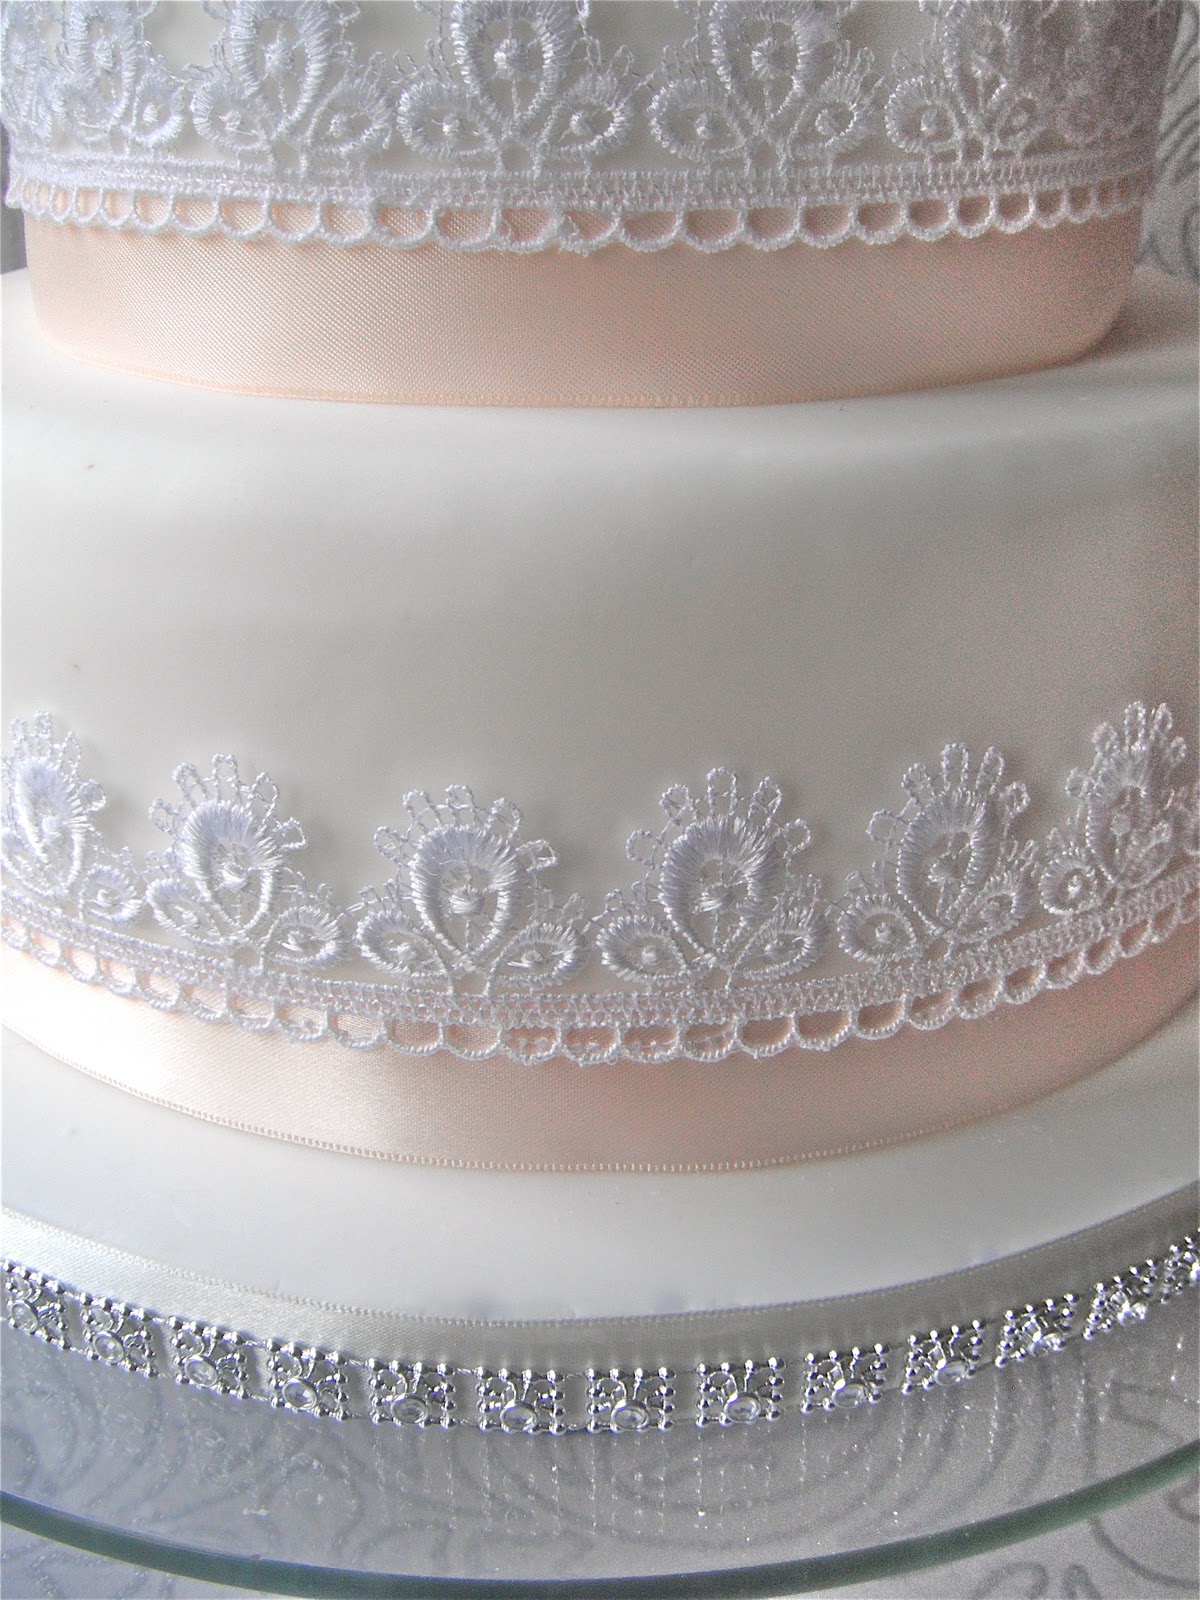 Wedding Cake with Lace